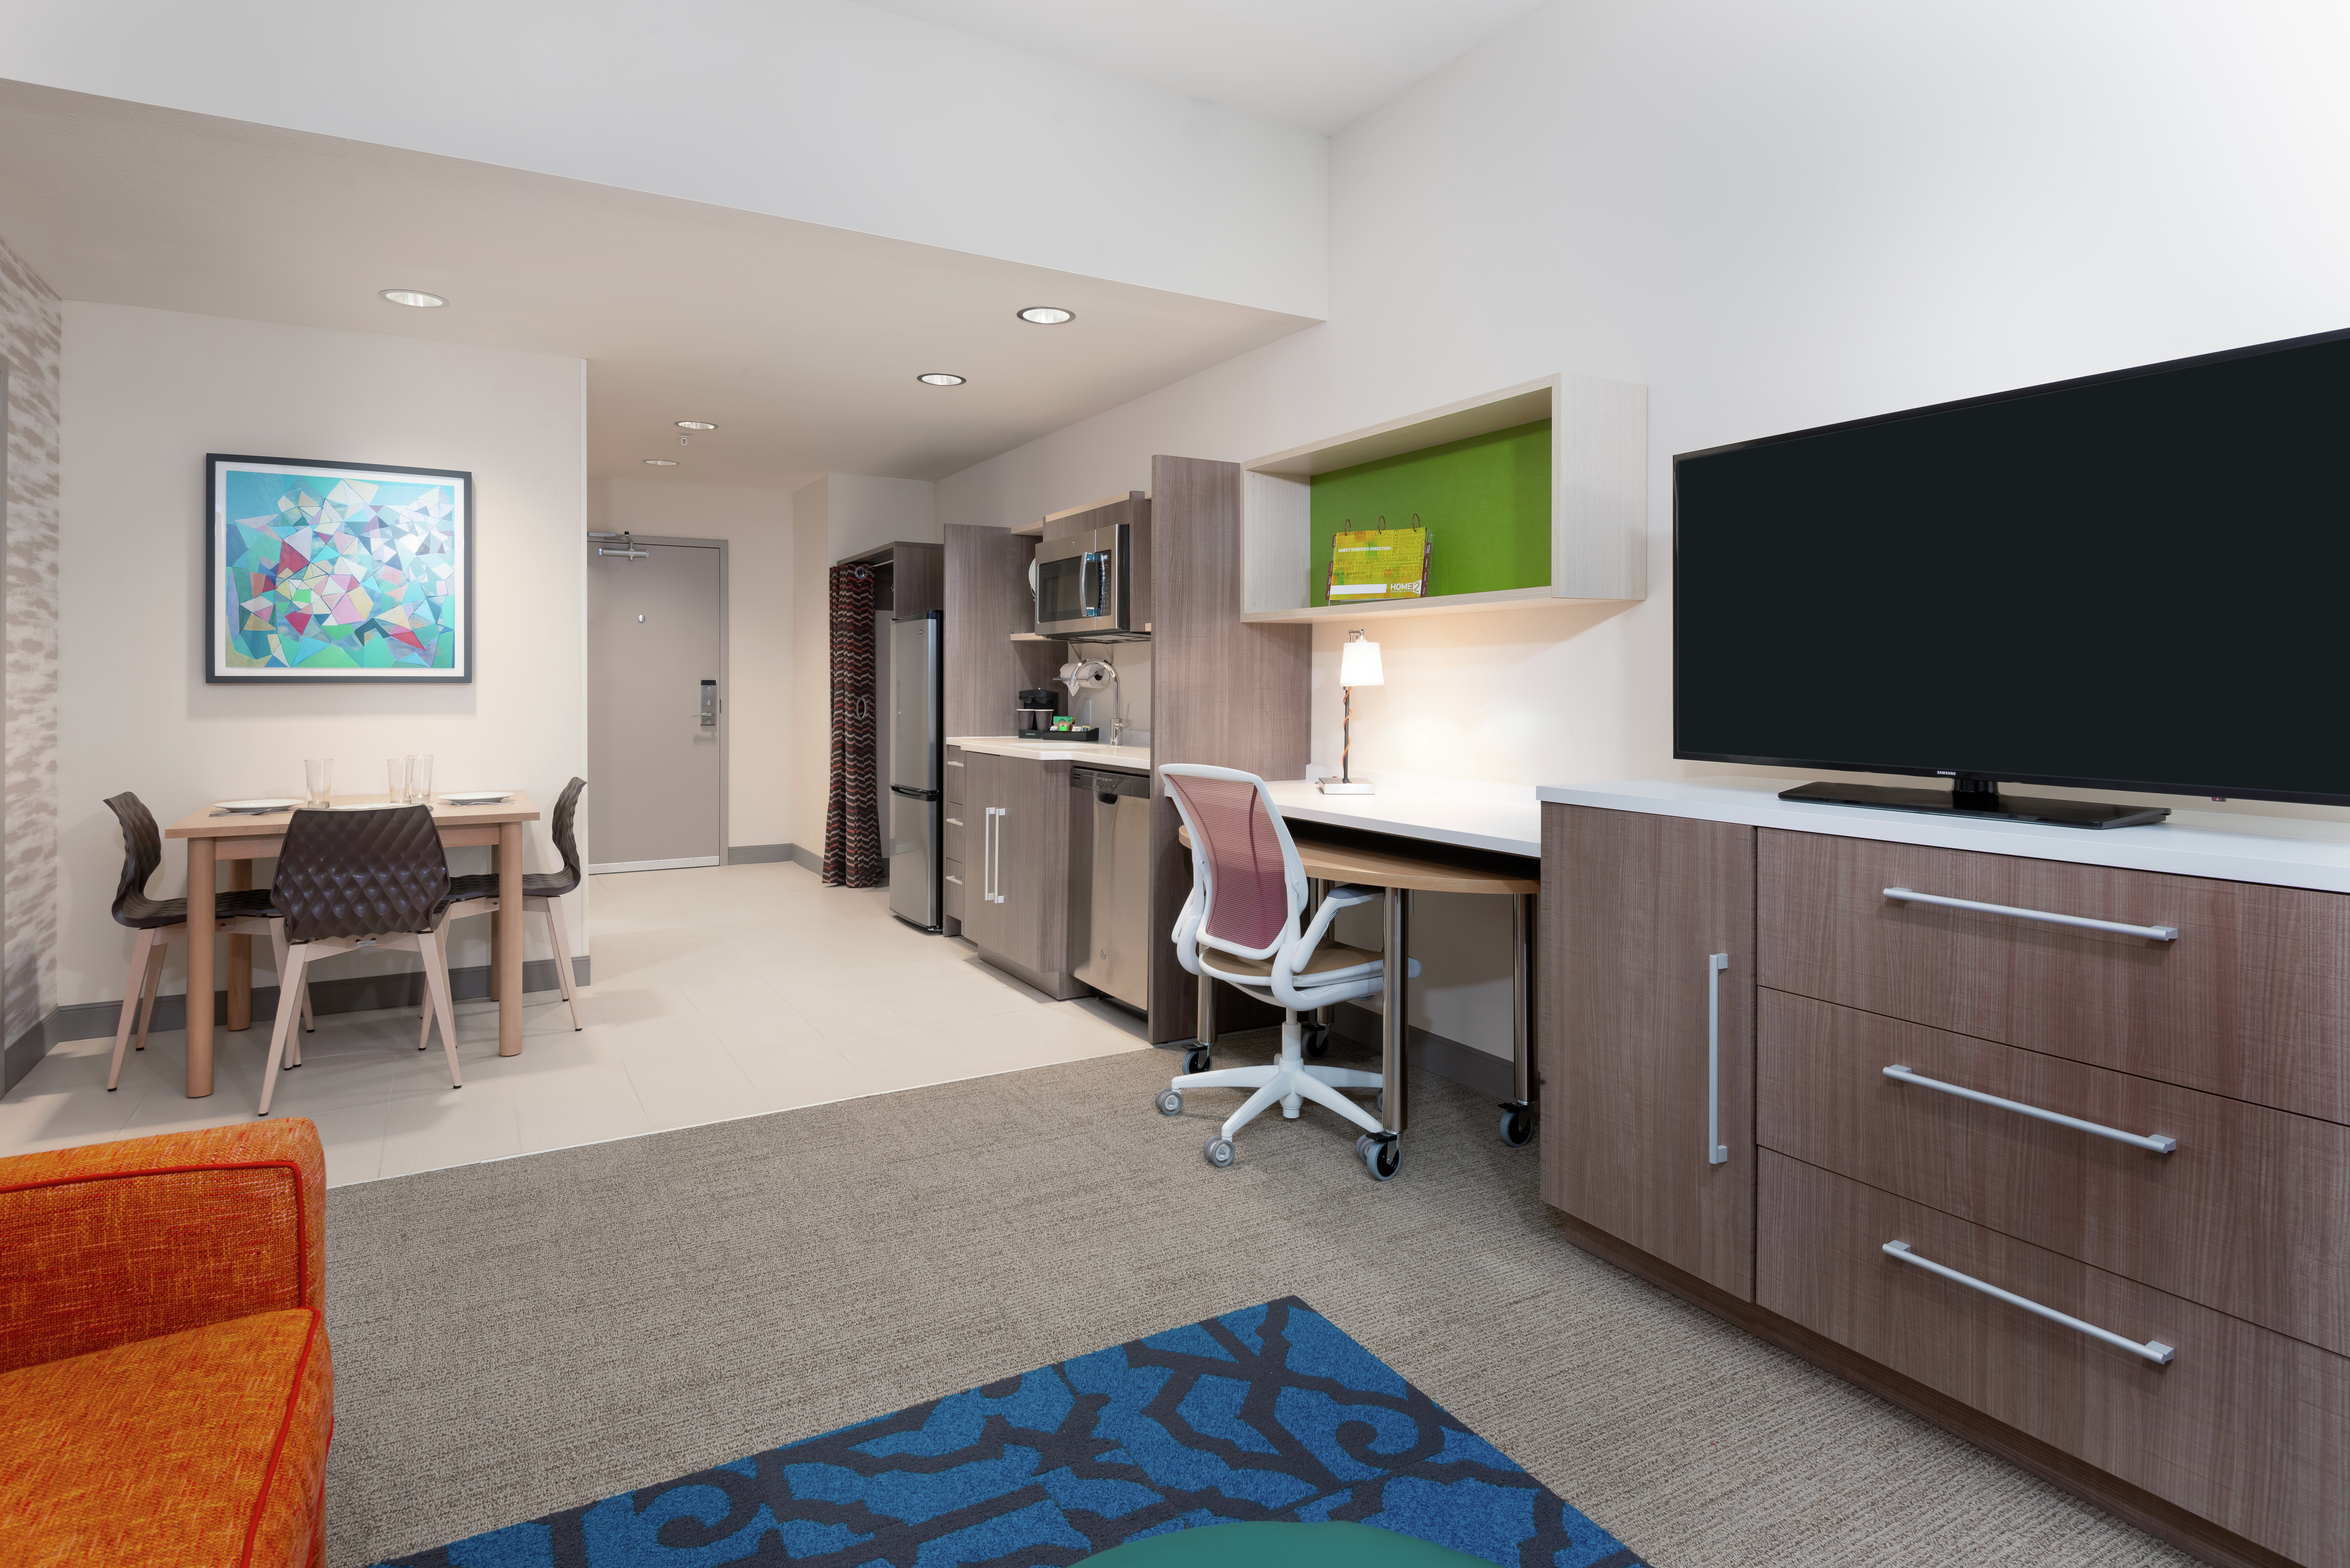 Suite Living Area with Work Desk, Room Technology, Kitchenette, and Dining Area